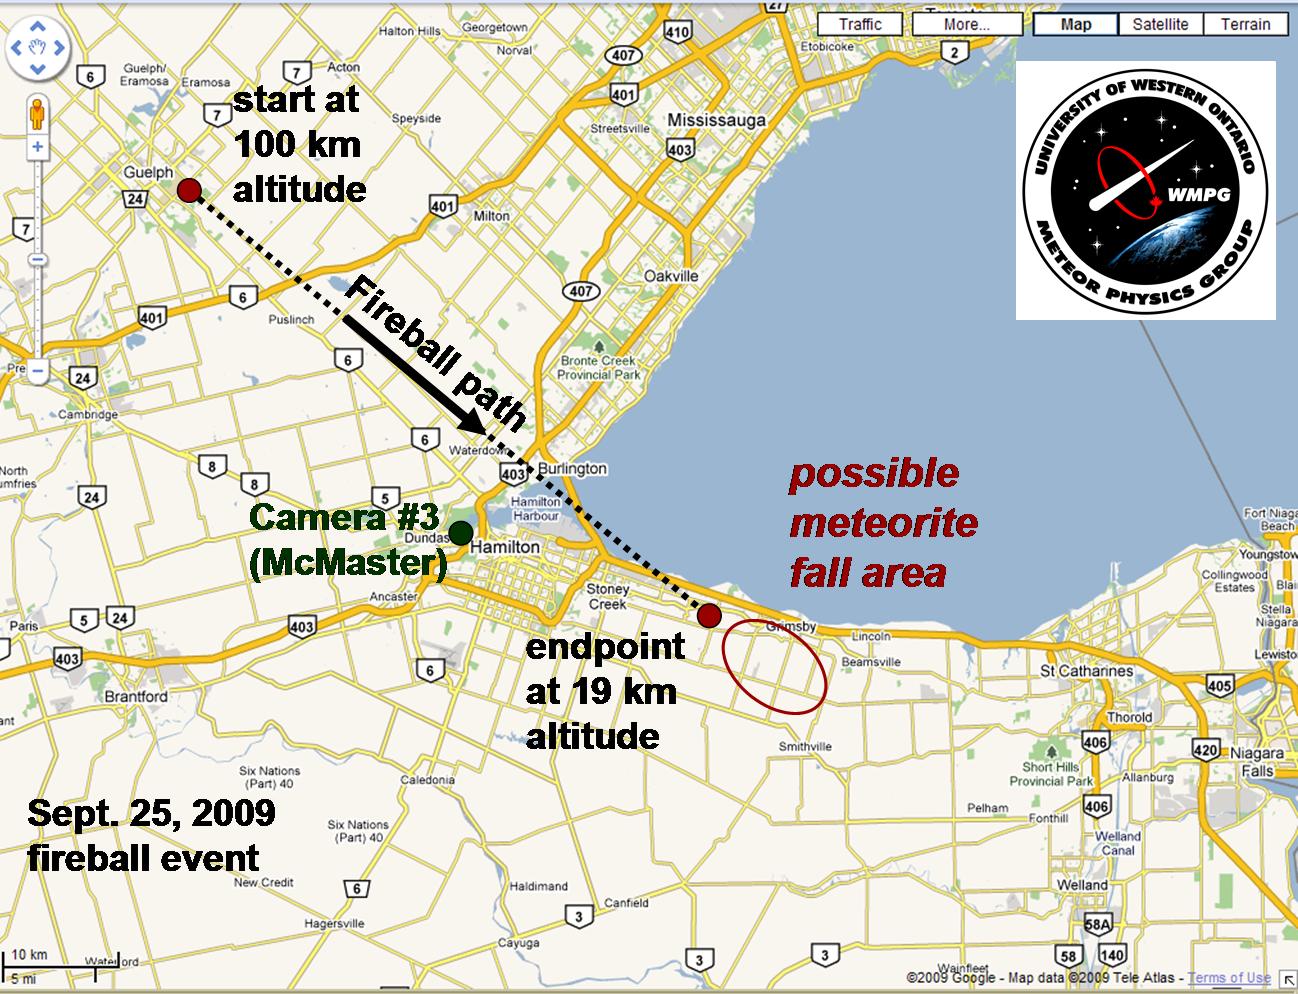 Ground track and projected meteorite fall area for the September 25th Grimsby fireball